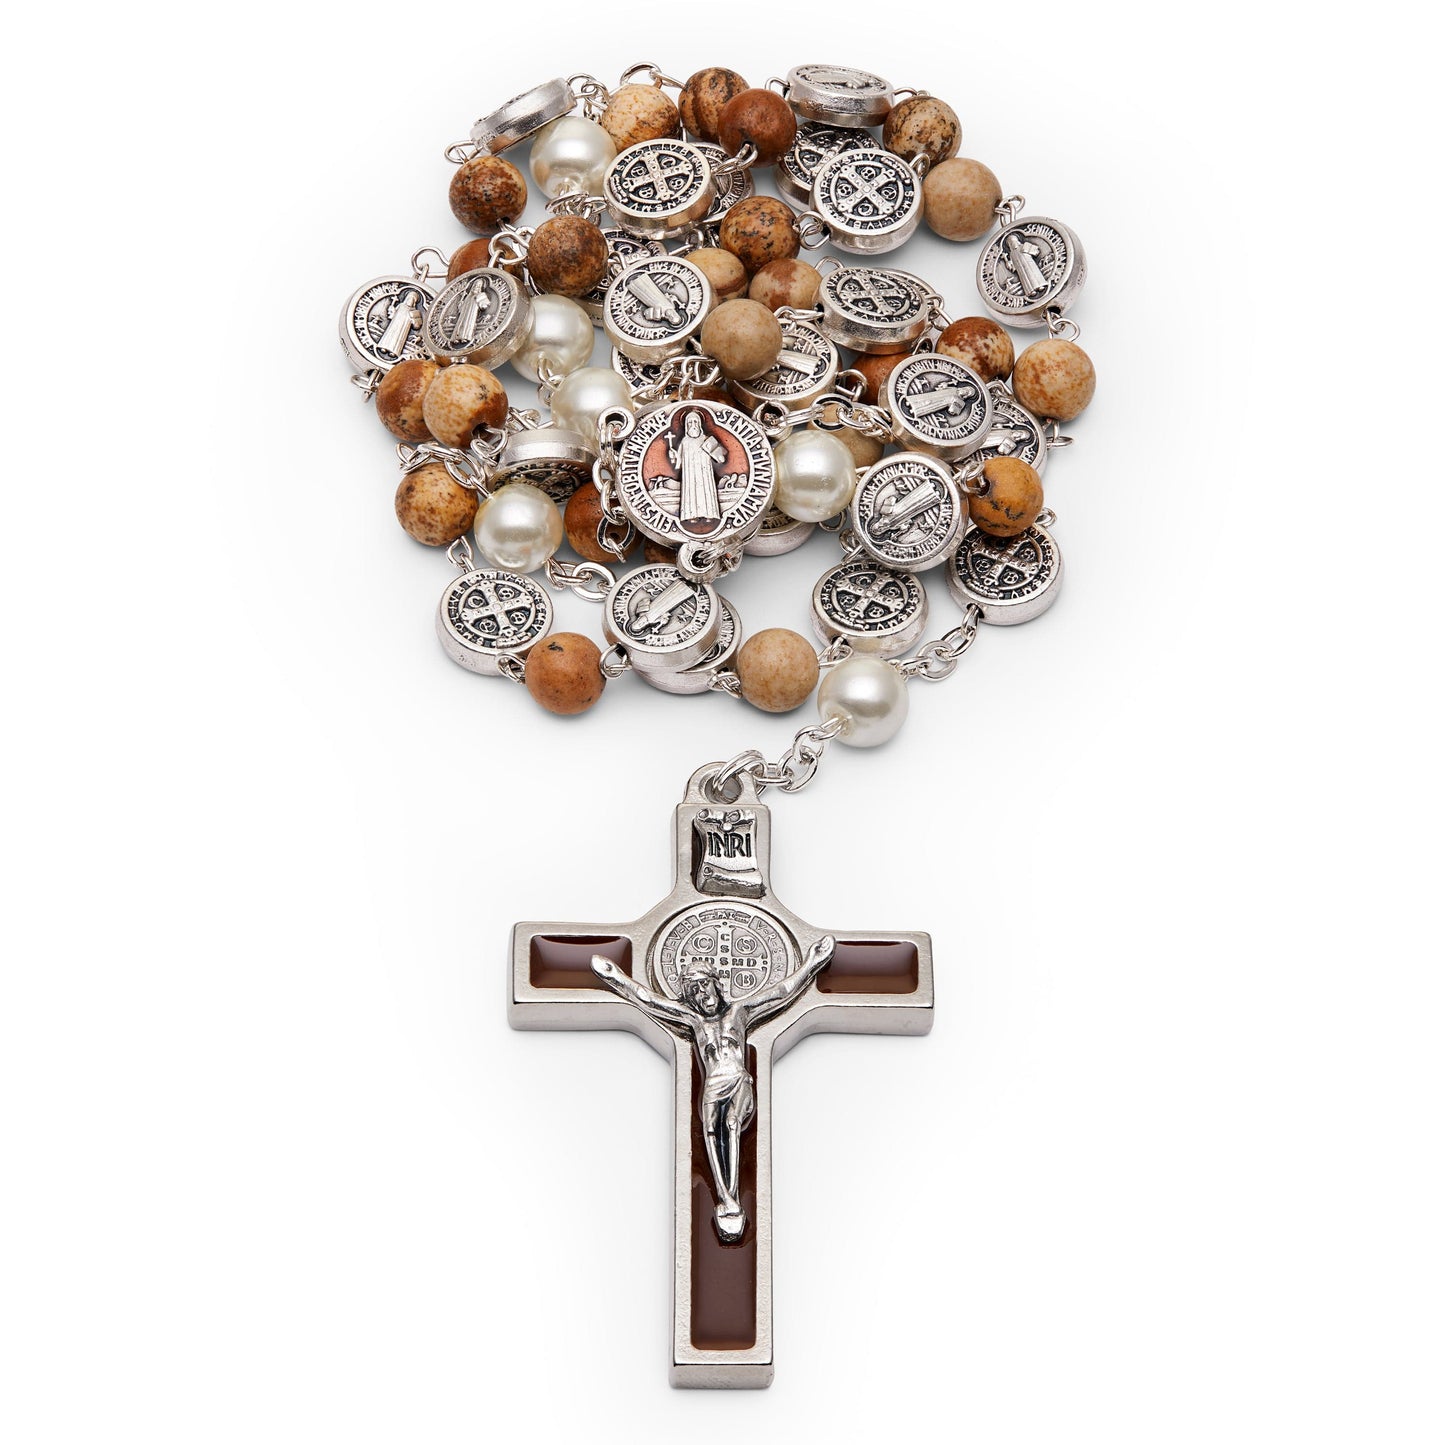 MONDO CATTOLICO Prayer Beads 53 cm (20.86 in) / 7 mm (0.27 in) St. Benedict Rosary in pearl glass our father beads